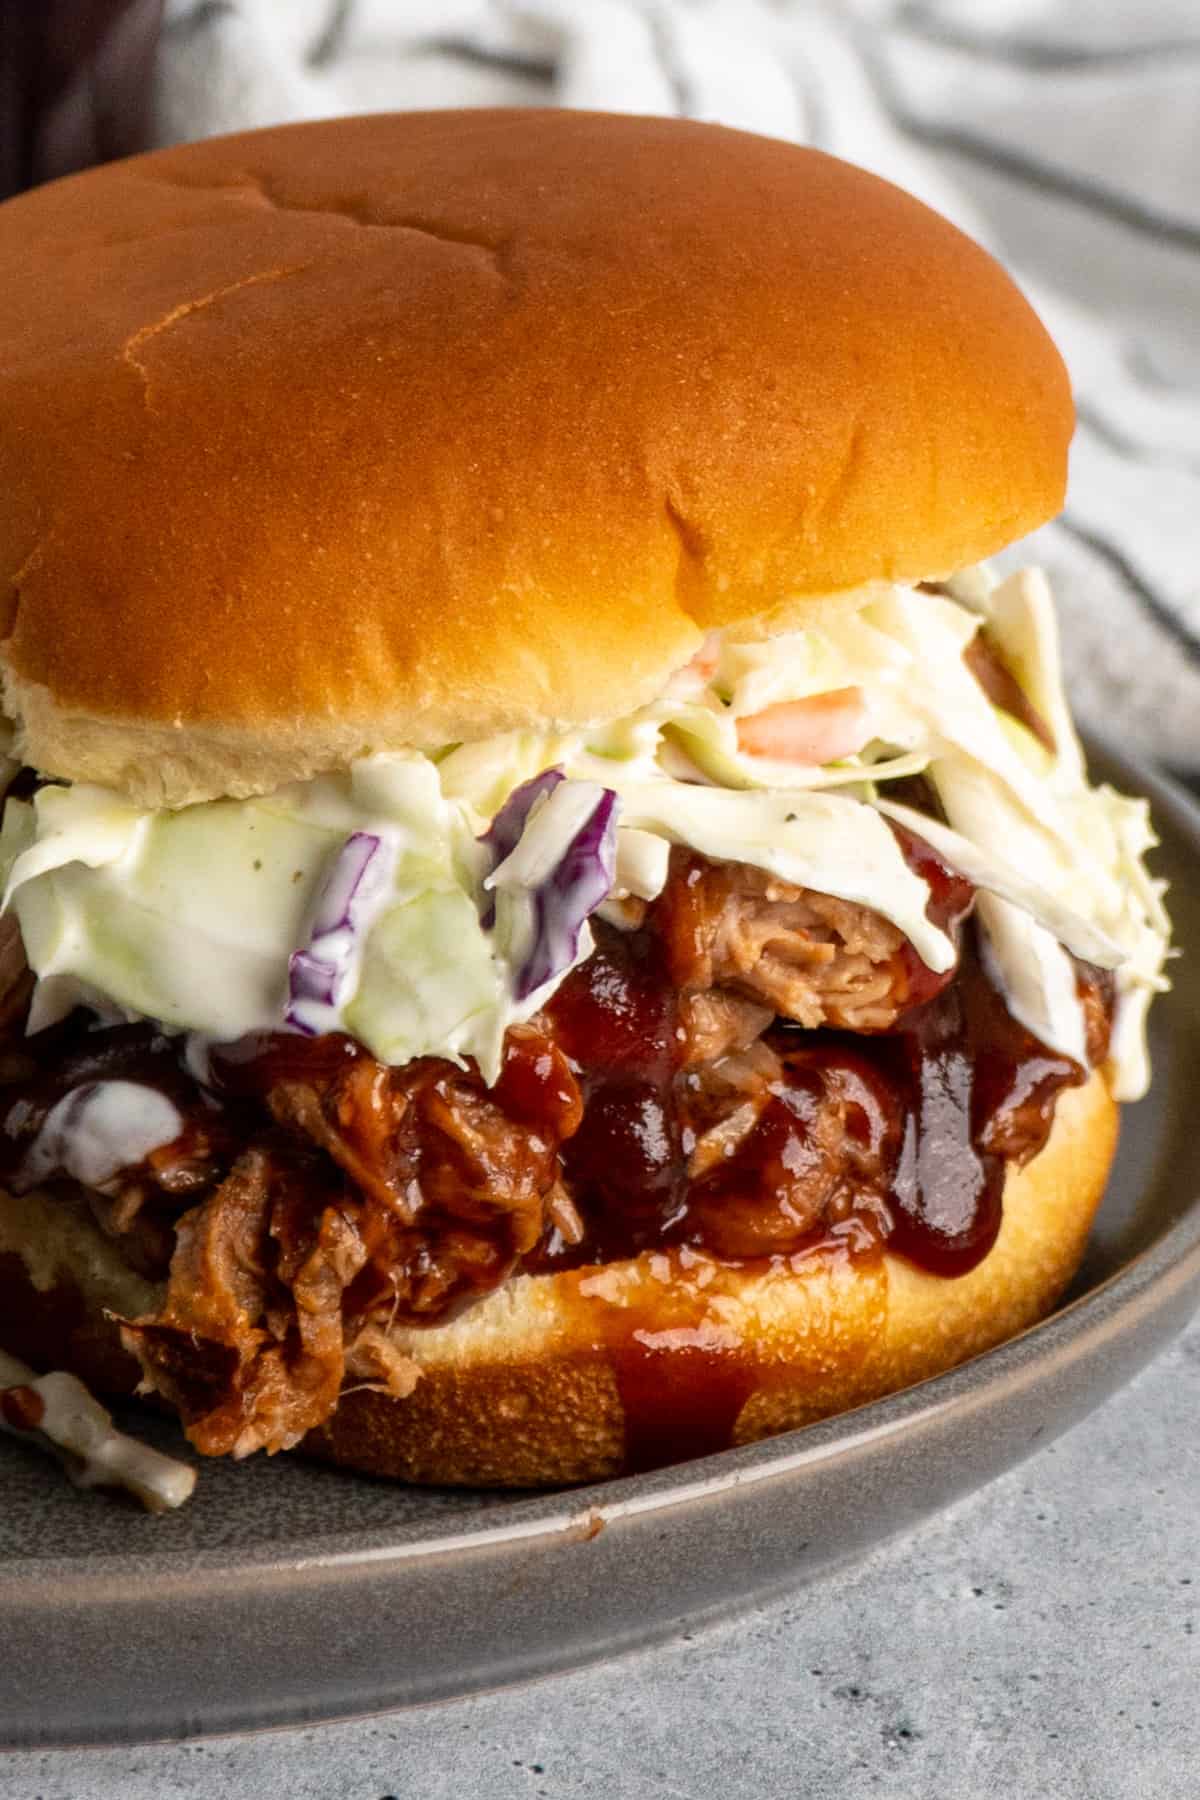 Close up of shredded bbq pork on a bun with coleslaw.